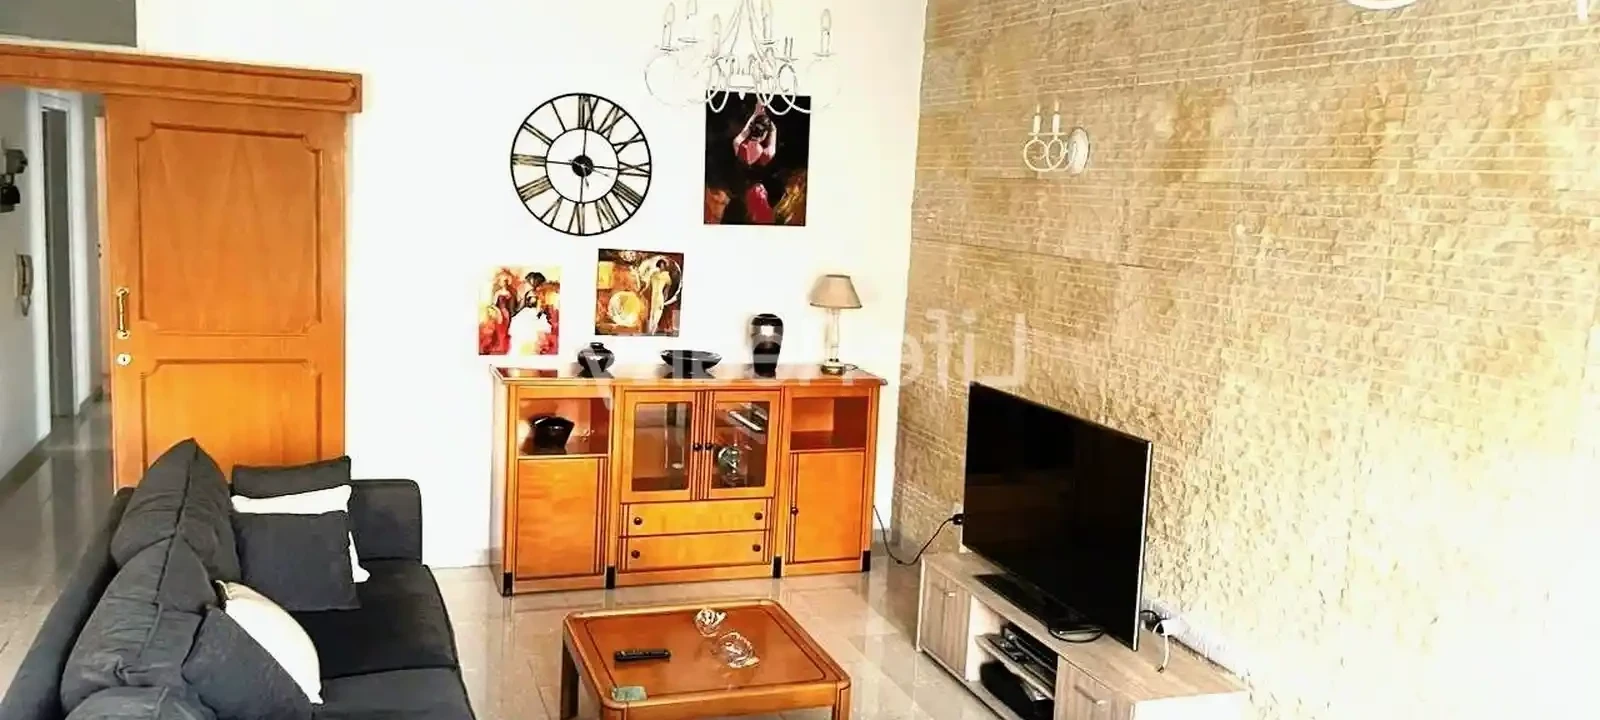 3-bedroom apartment to rent €1.700, image 1